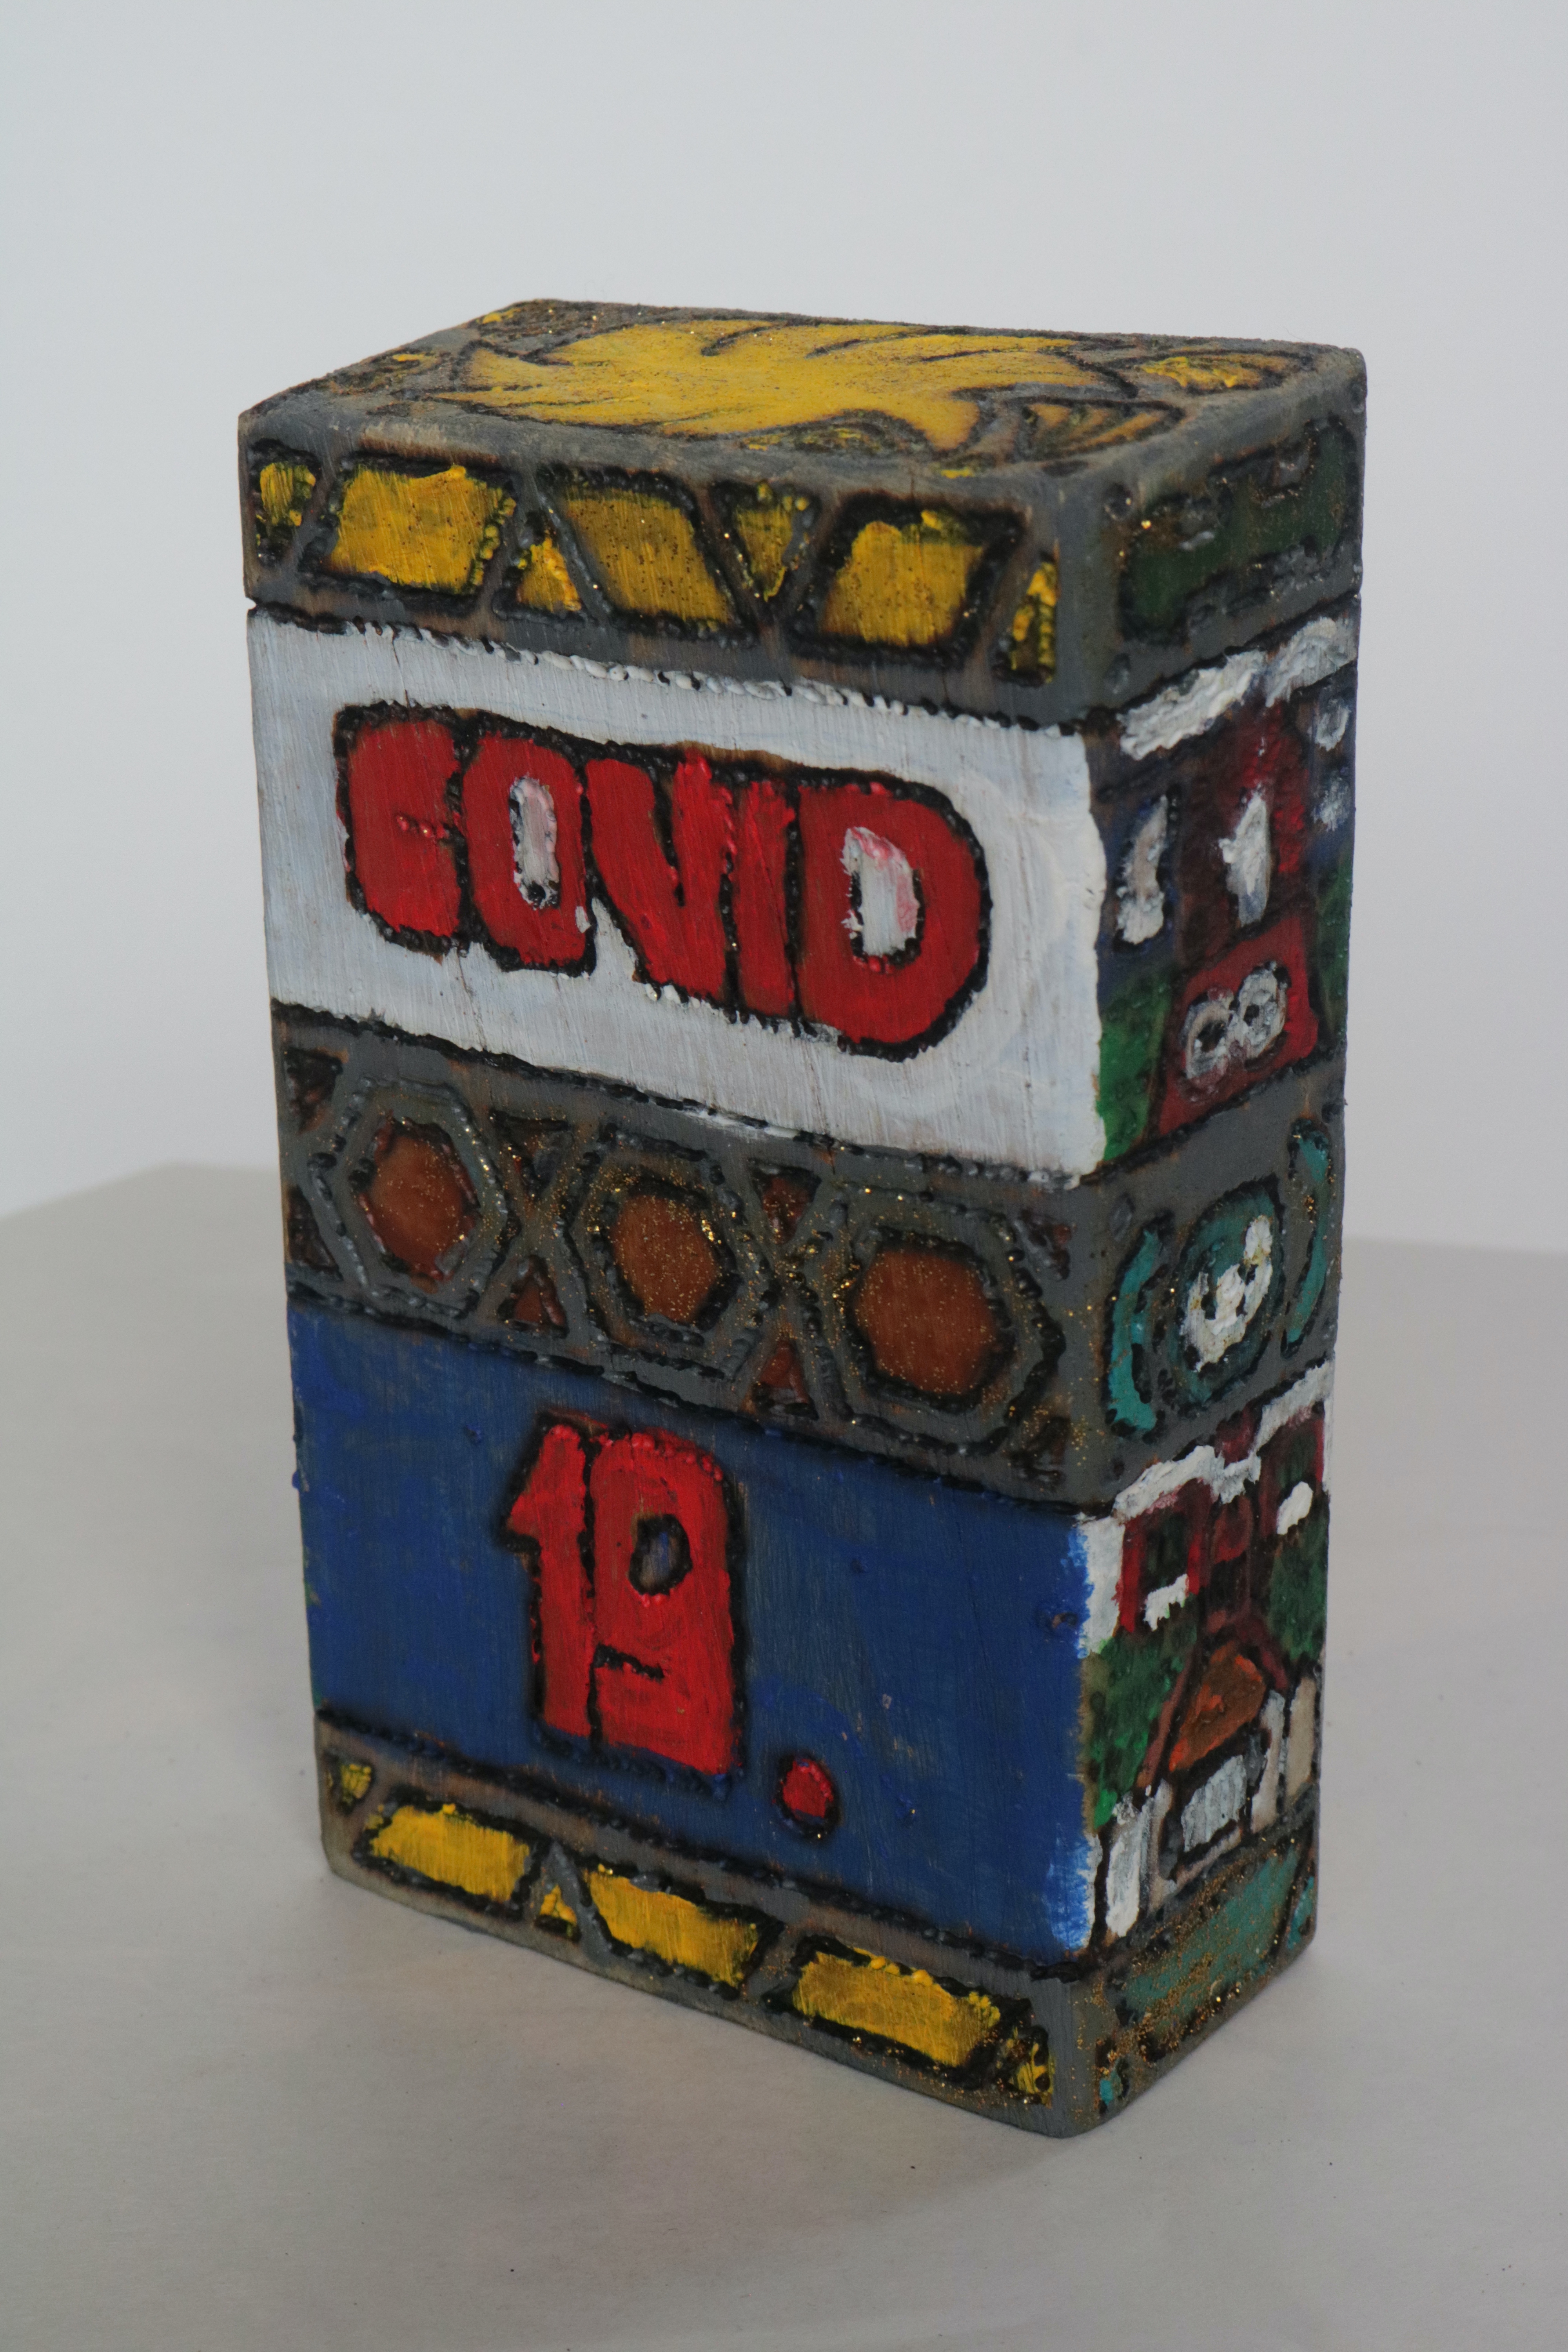 a short squat block. In red the words bold, COVID 19. On the sides are hints of other structures painted.